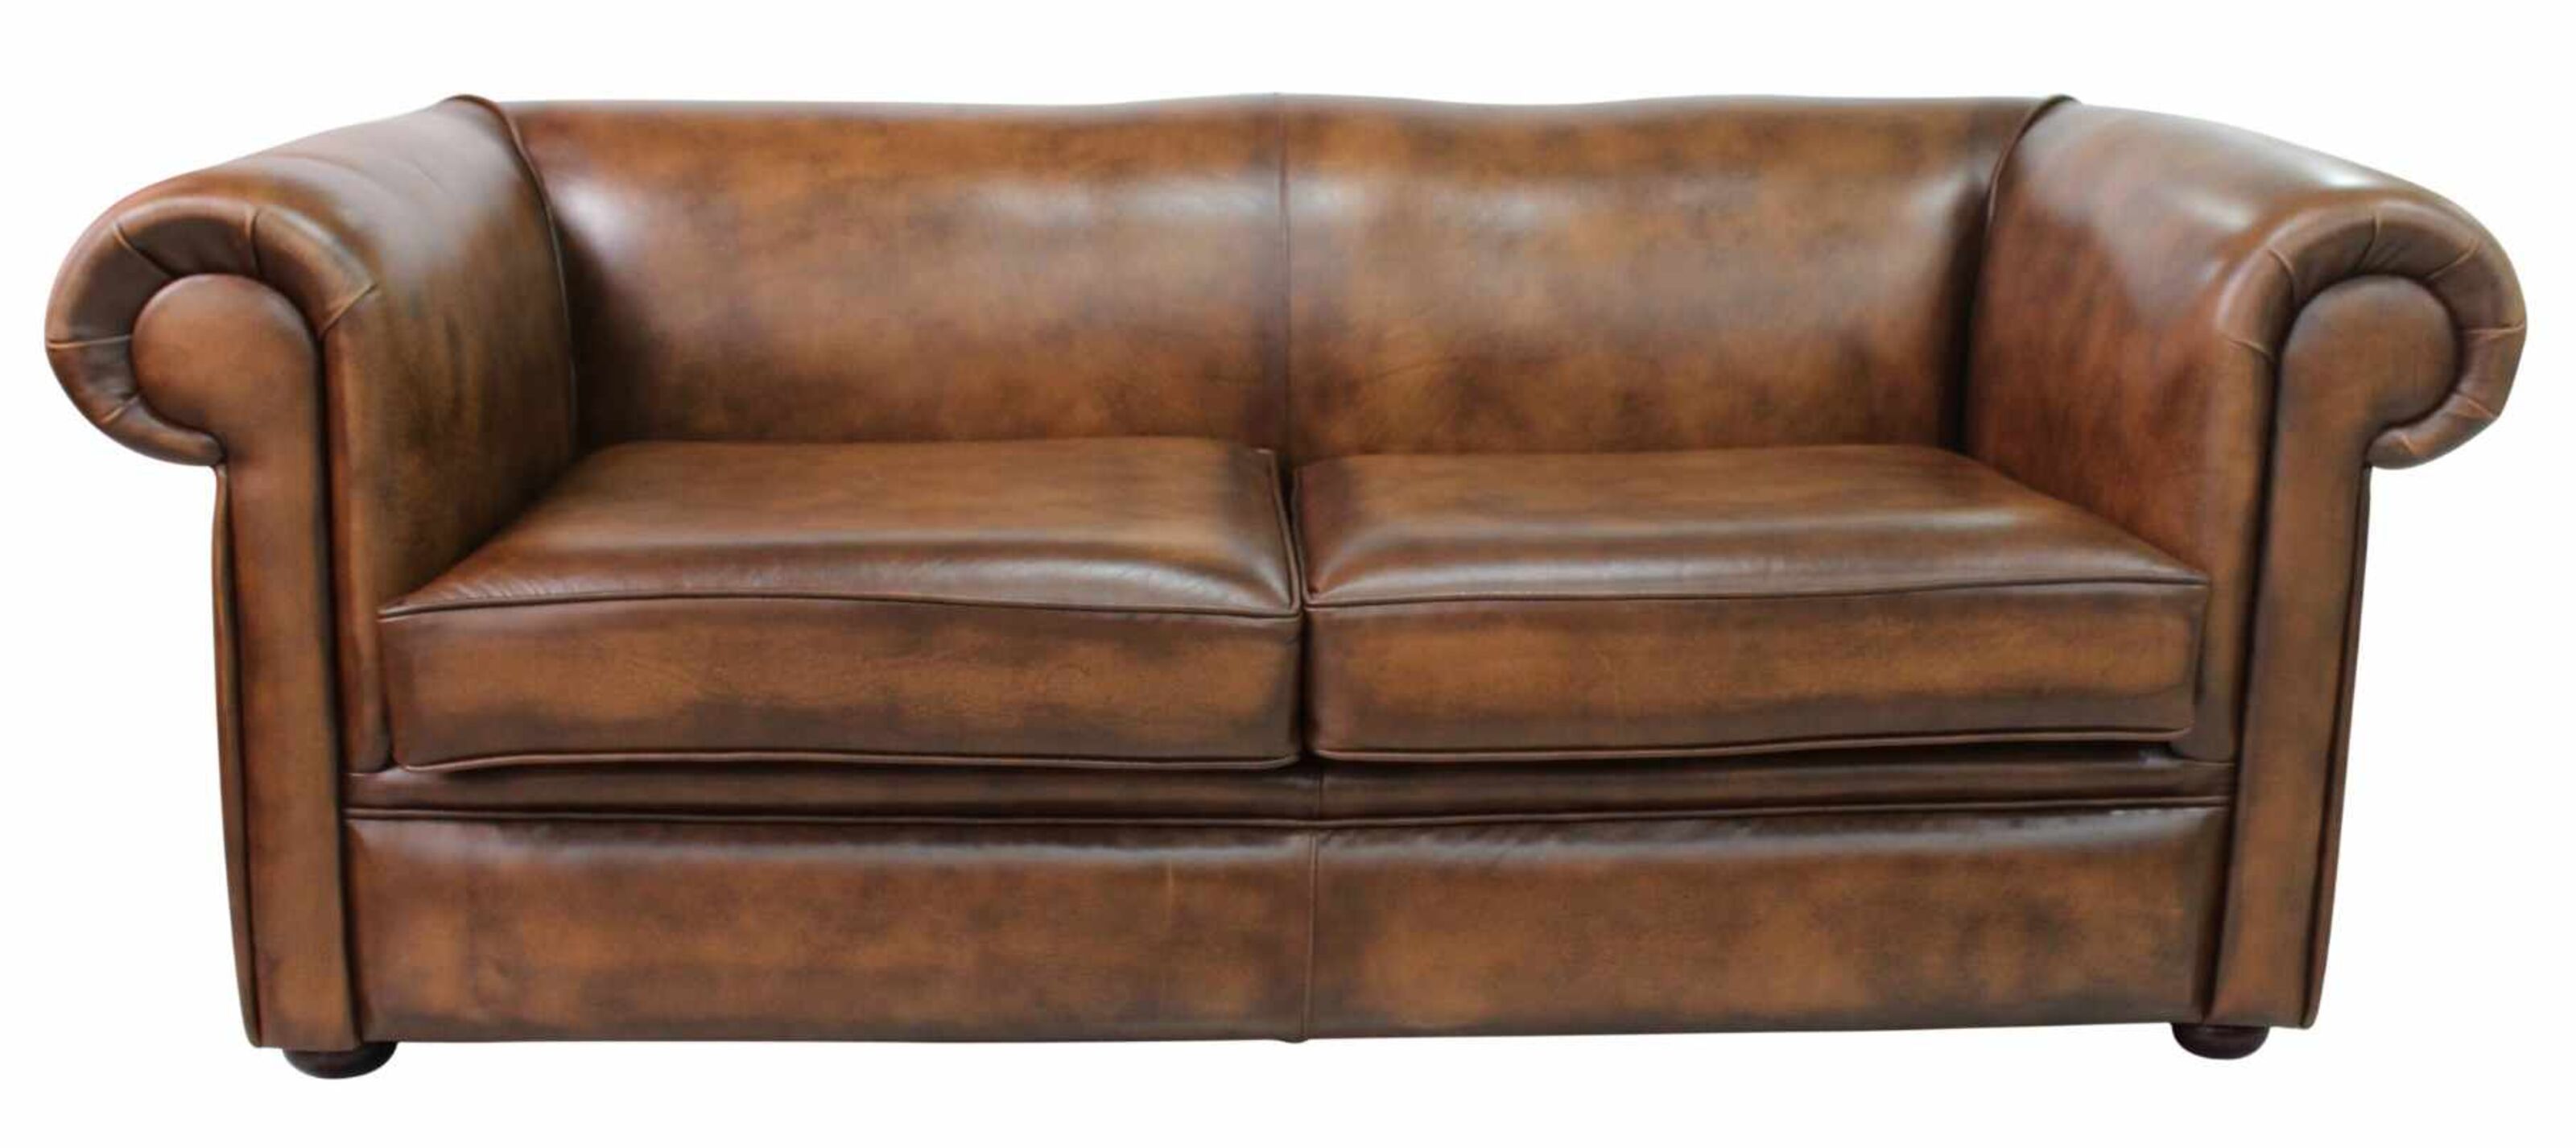 Exploring the Iconic Chesterfield Sofa  %Post Title